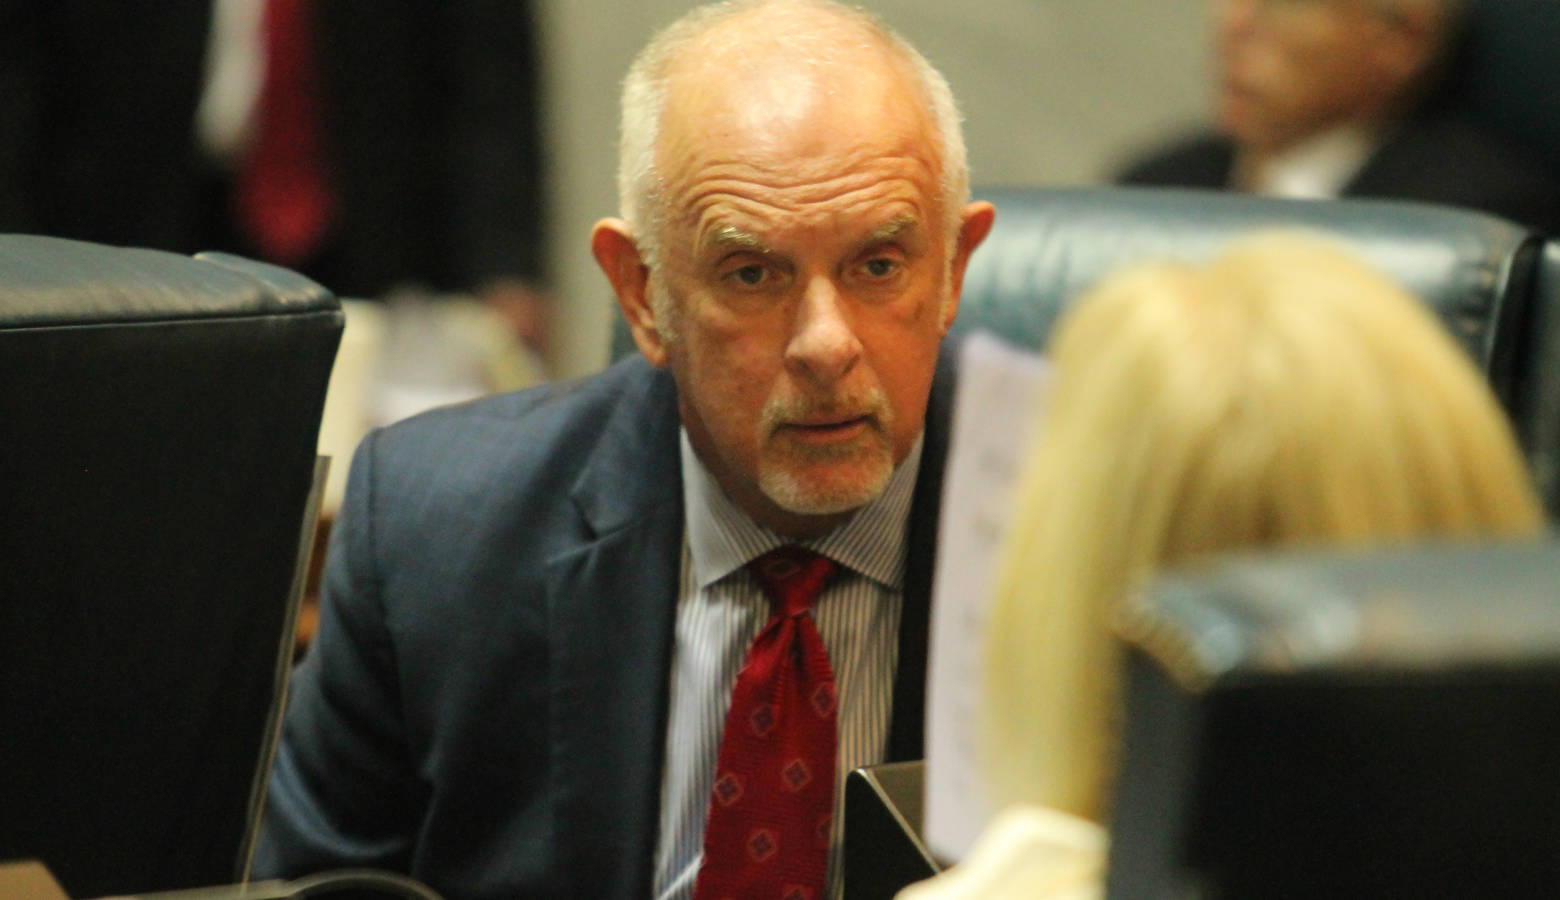 Sen. Travis Holdman (R-Markle) says some Hoosier taxpayers would have seen tax increases without legislation approved during the special session. (Lauren Chapman/IPB News)